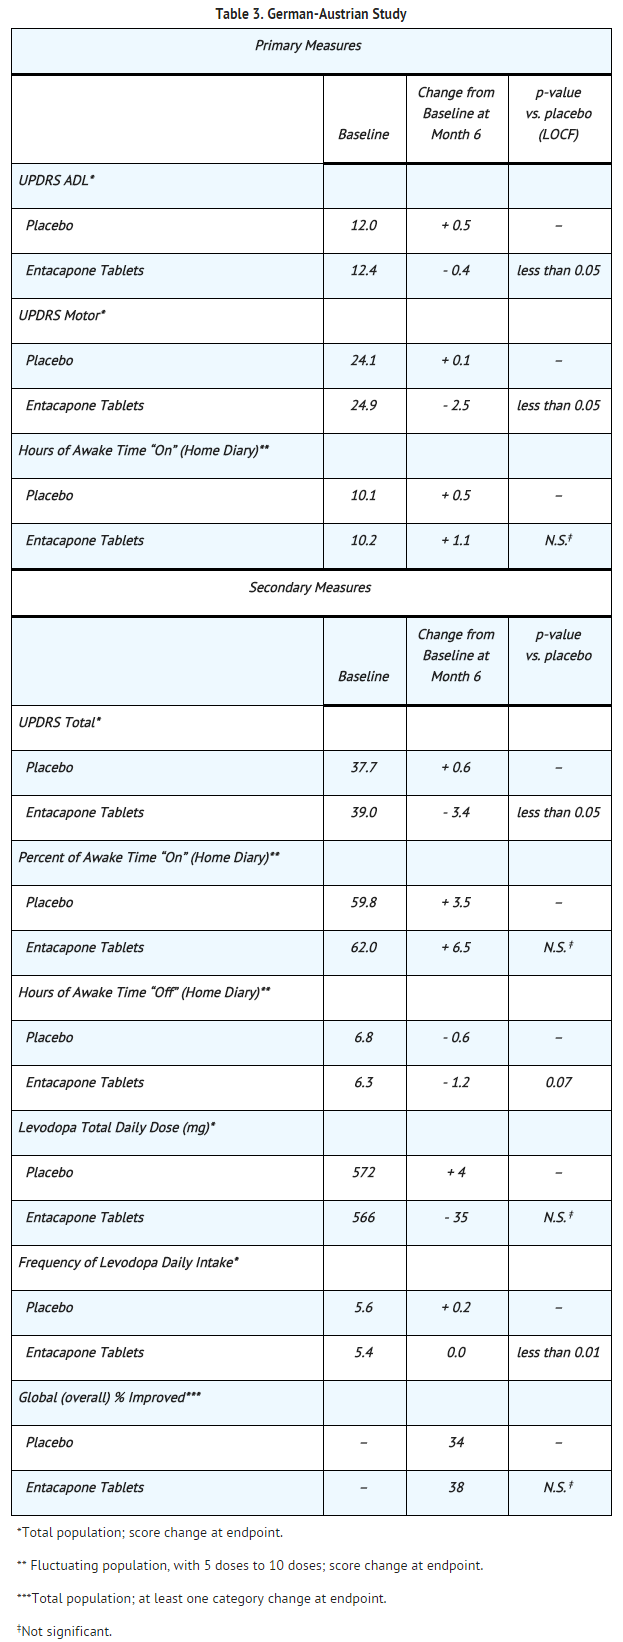 Entacapone Clinical Studies Table 3.png